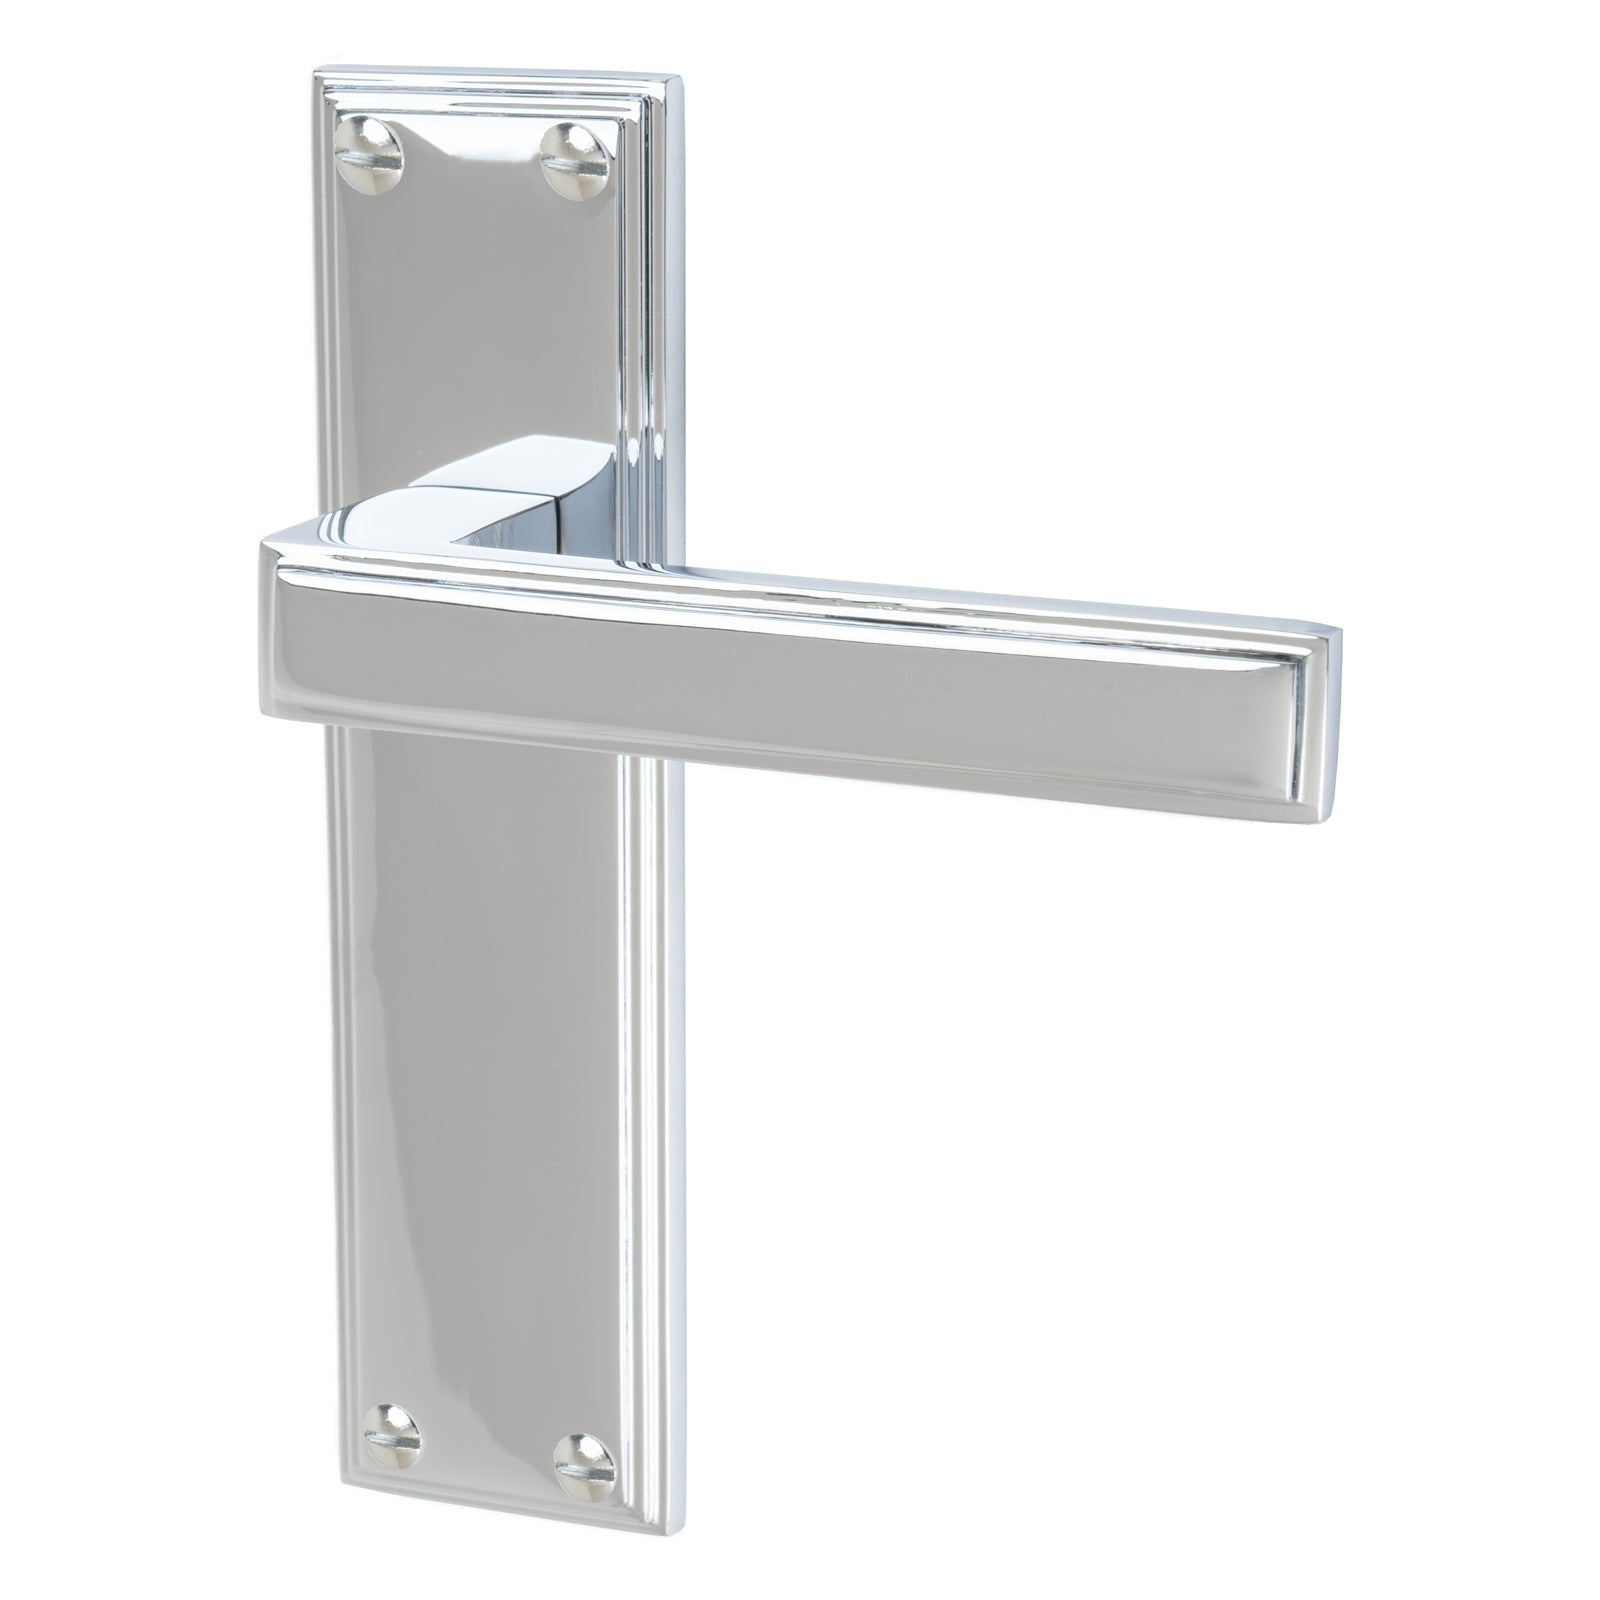 Atlantis Door Handles On Plate Latch Handle in Polished Chrome SHOW